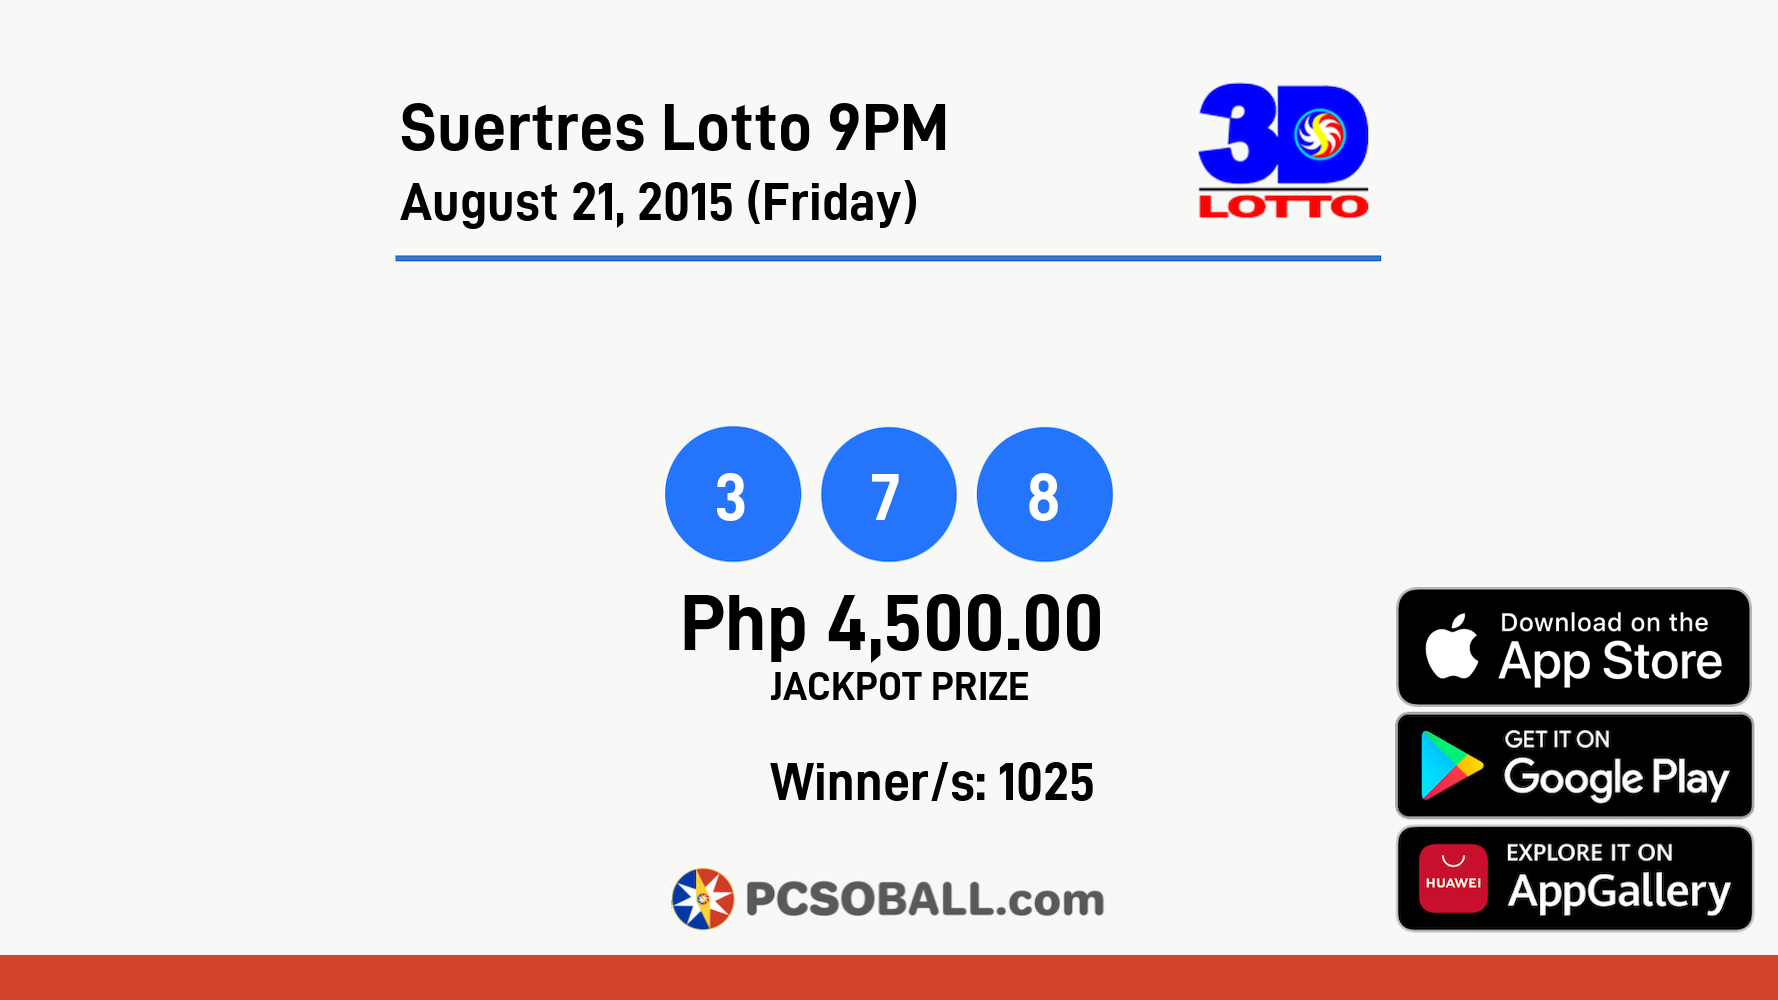 Suertres Lotto 9PM August 21, 2015 (Friday) Result